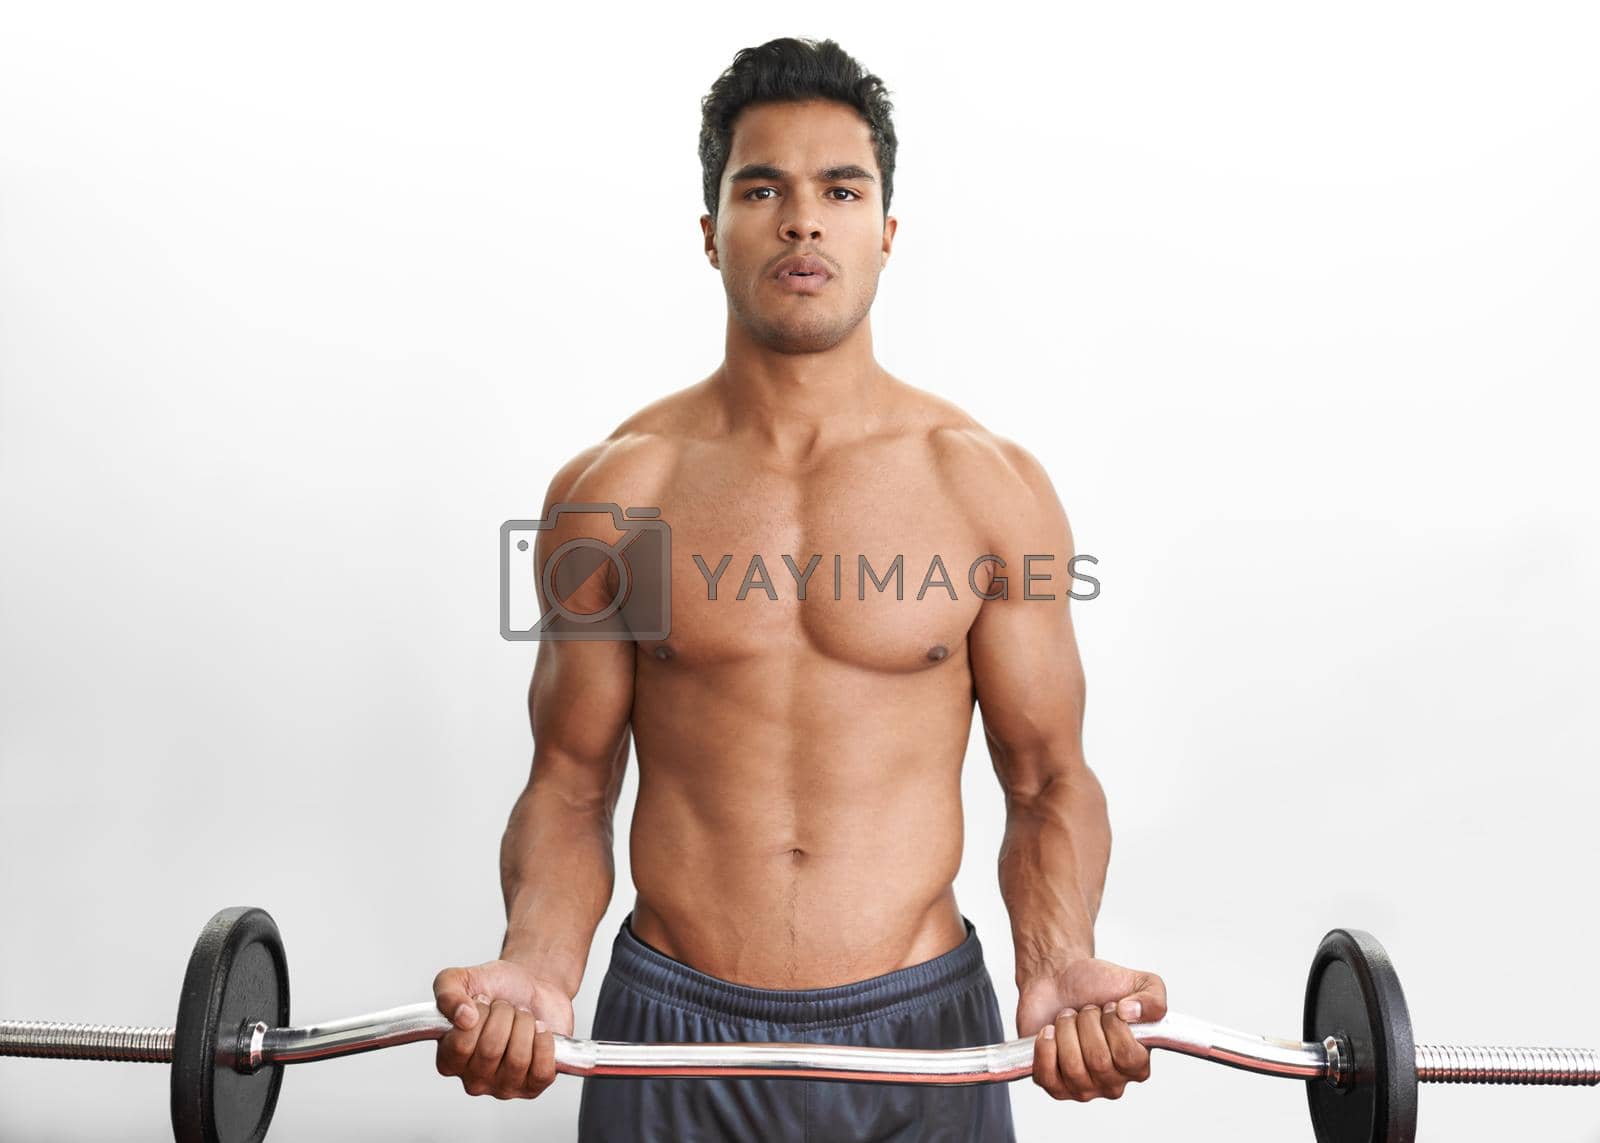 Royalty free image of Building his upper body strength. Studio portrait of an athletic young man lifting a barbell. by YuriArcurs